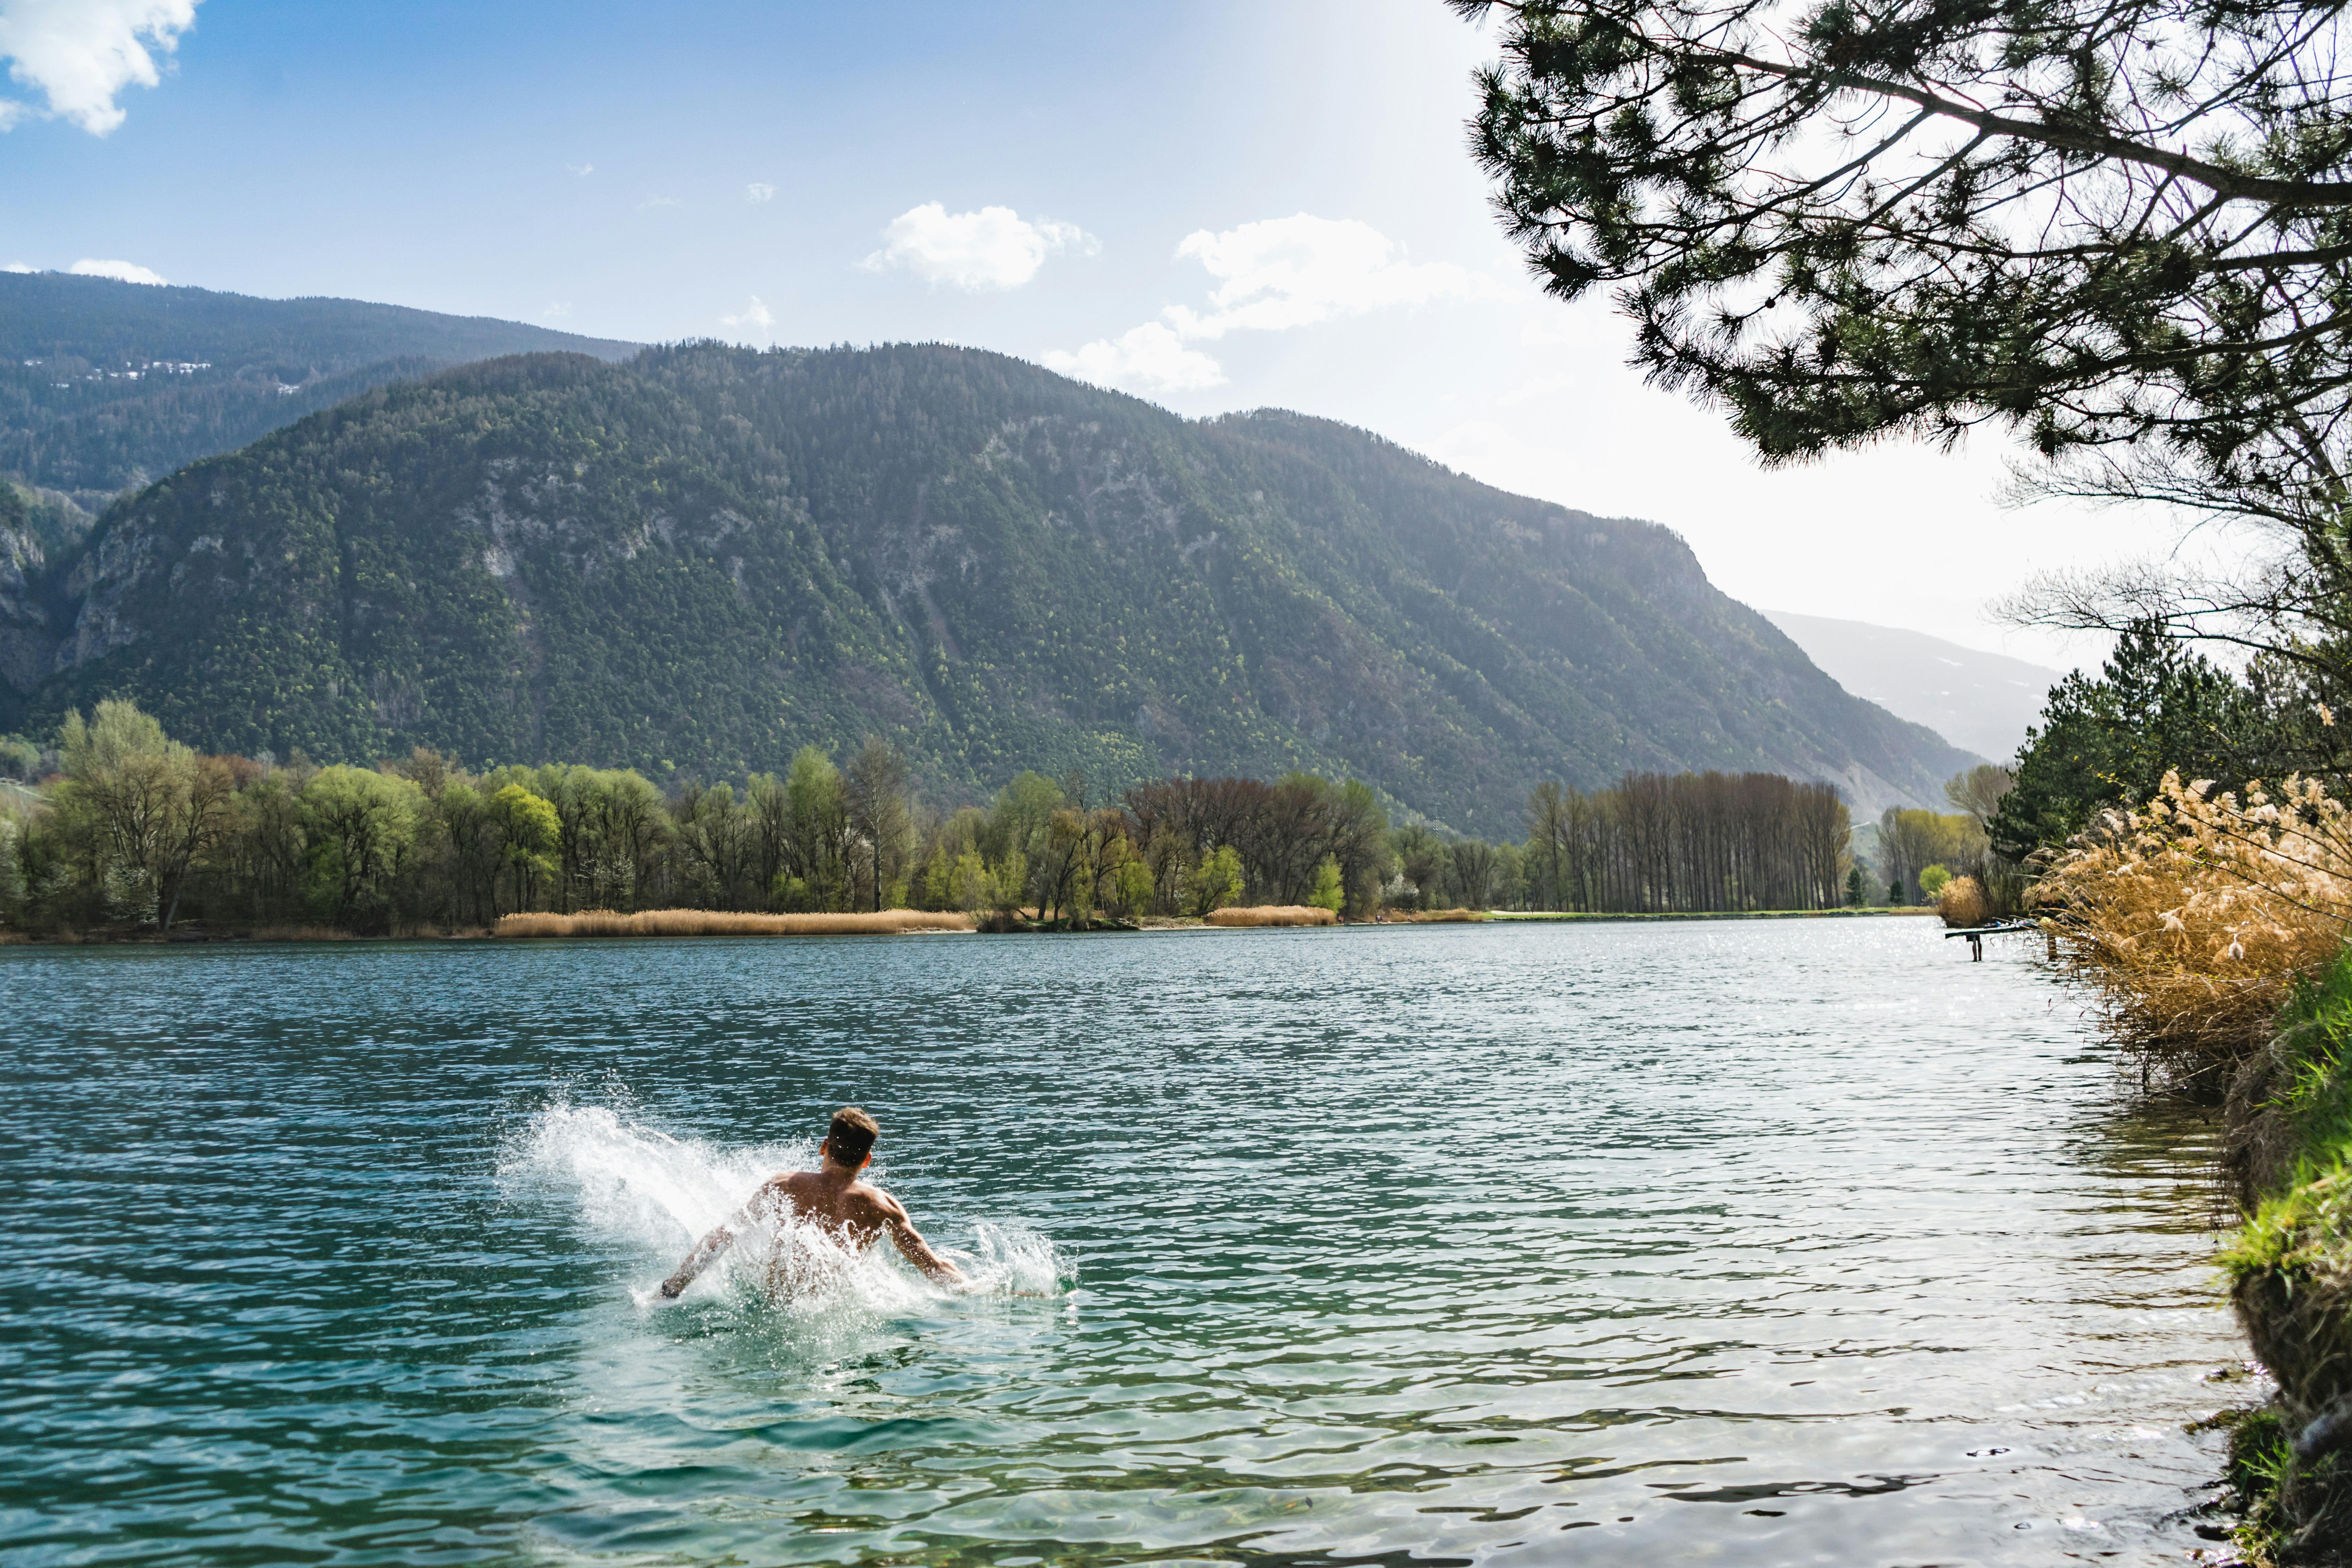 woman in white dress on water near green trees and mountain during daytime